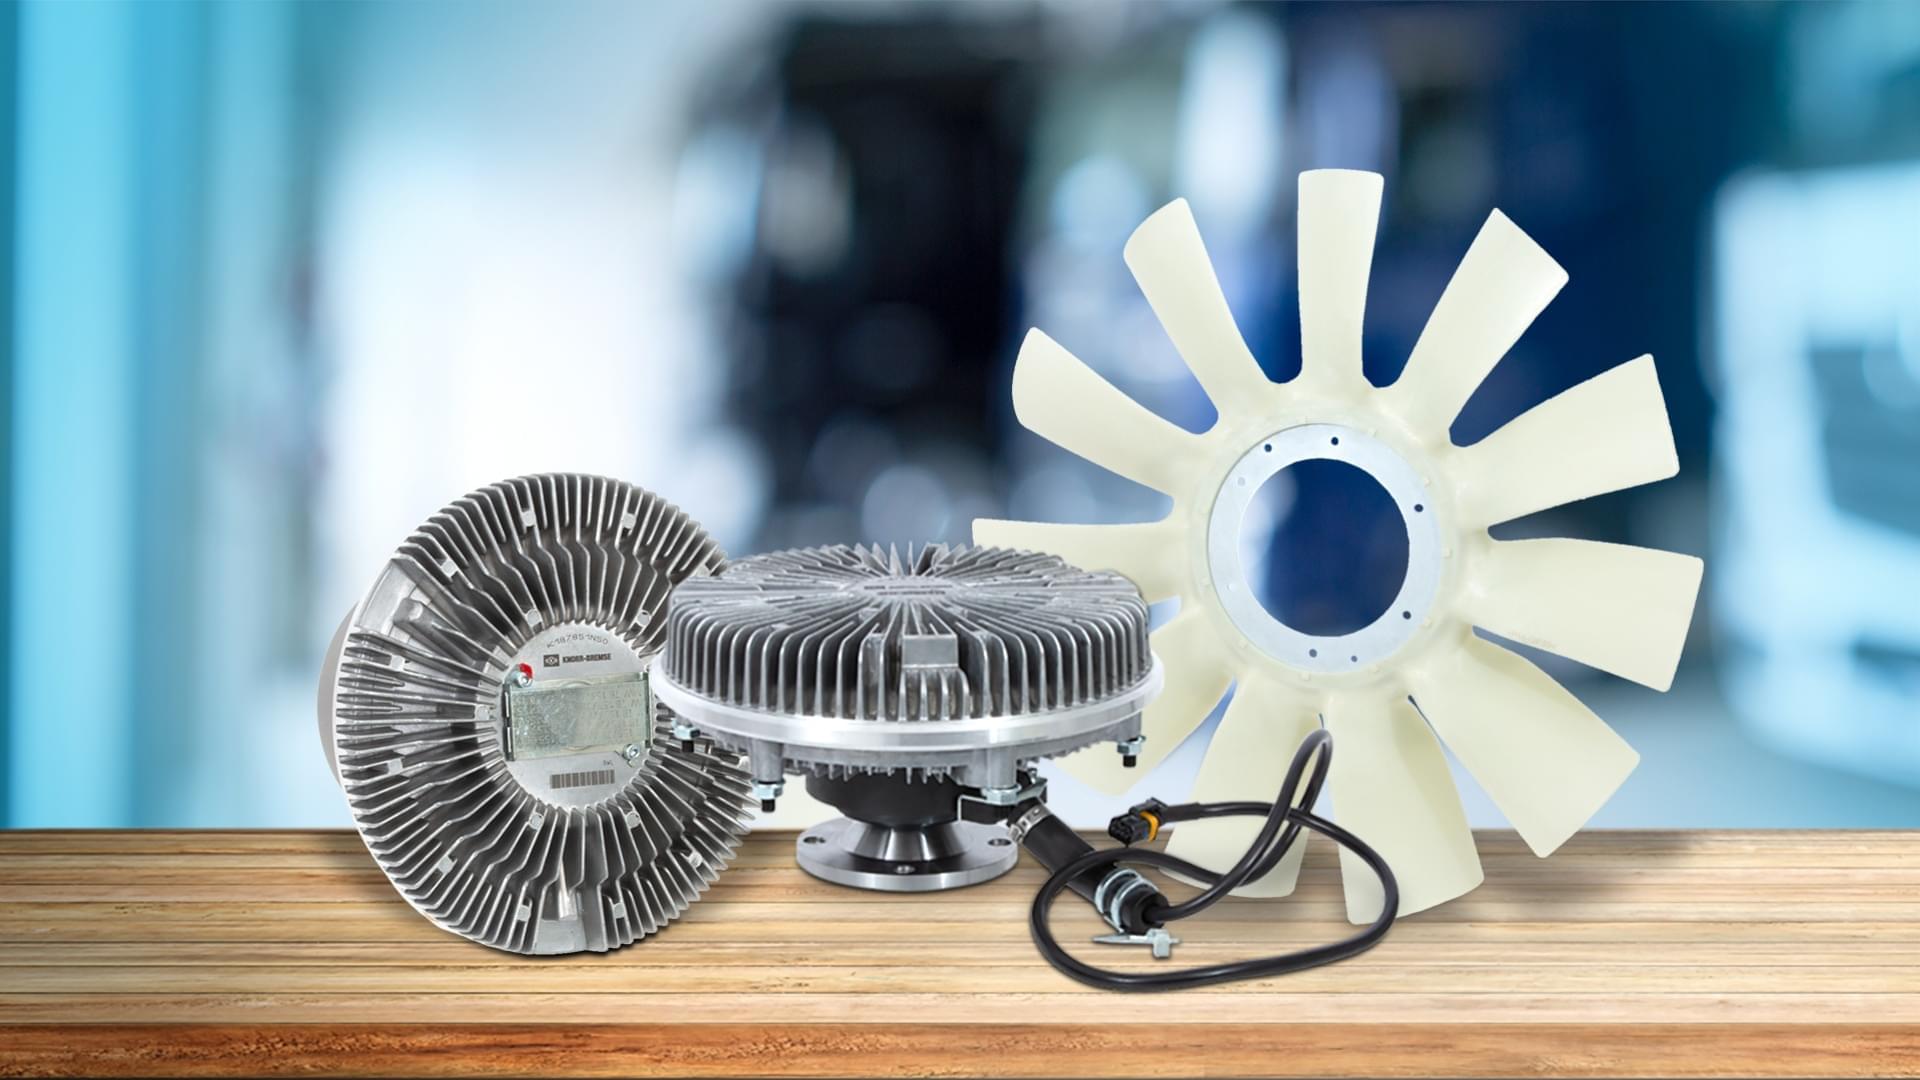 https://truckservices.knorr-bremse.com/media/0000_startseite/keeping-cool-fan-clutches-knorr-bremse-truckservices_16x9_1920w.jpg